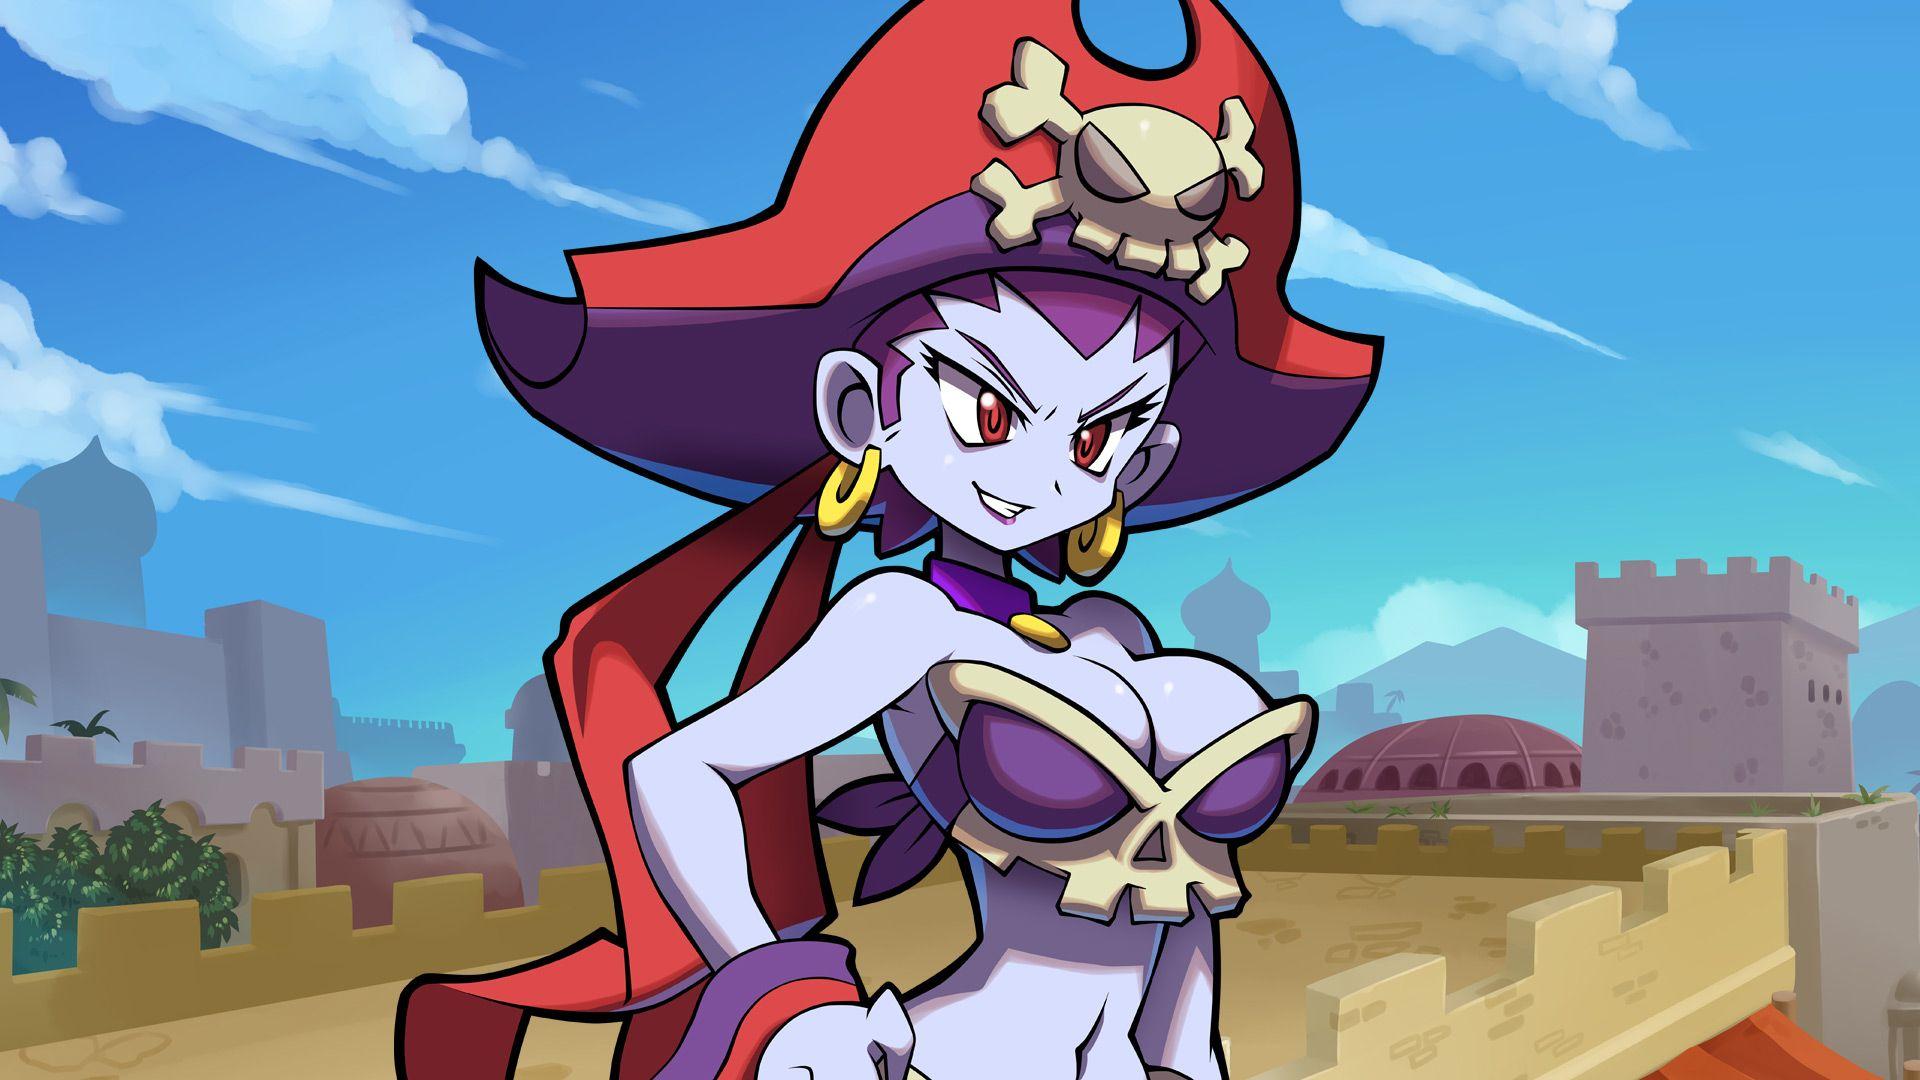 Risky Boots. Wallpaper from Shantae and the Pirate's Curse